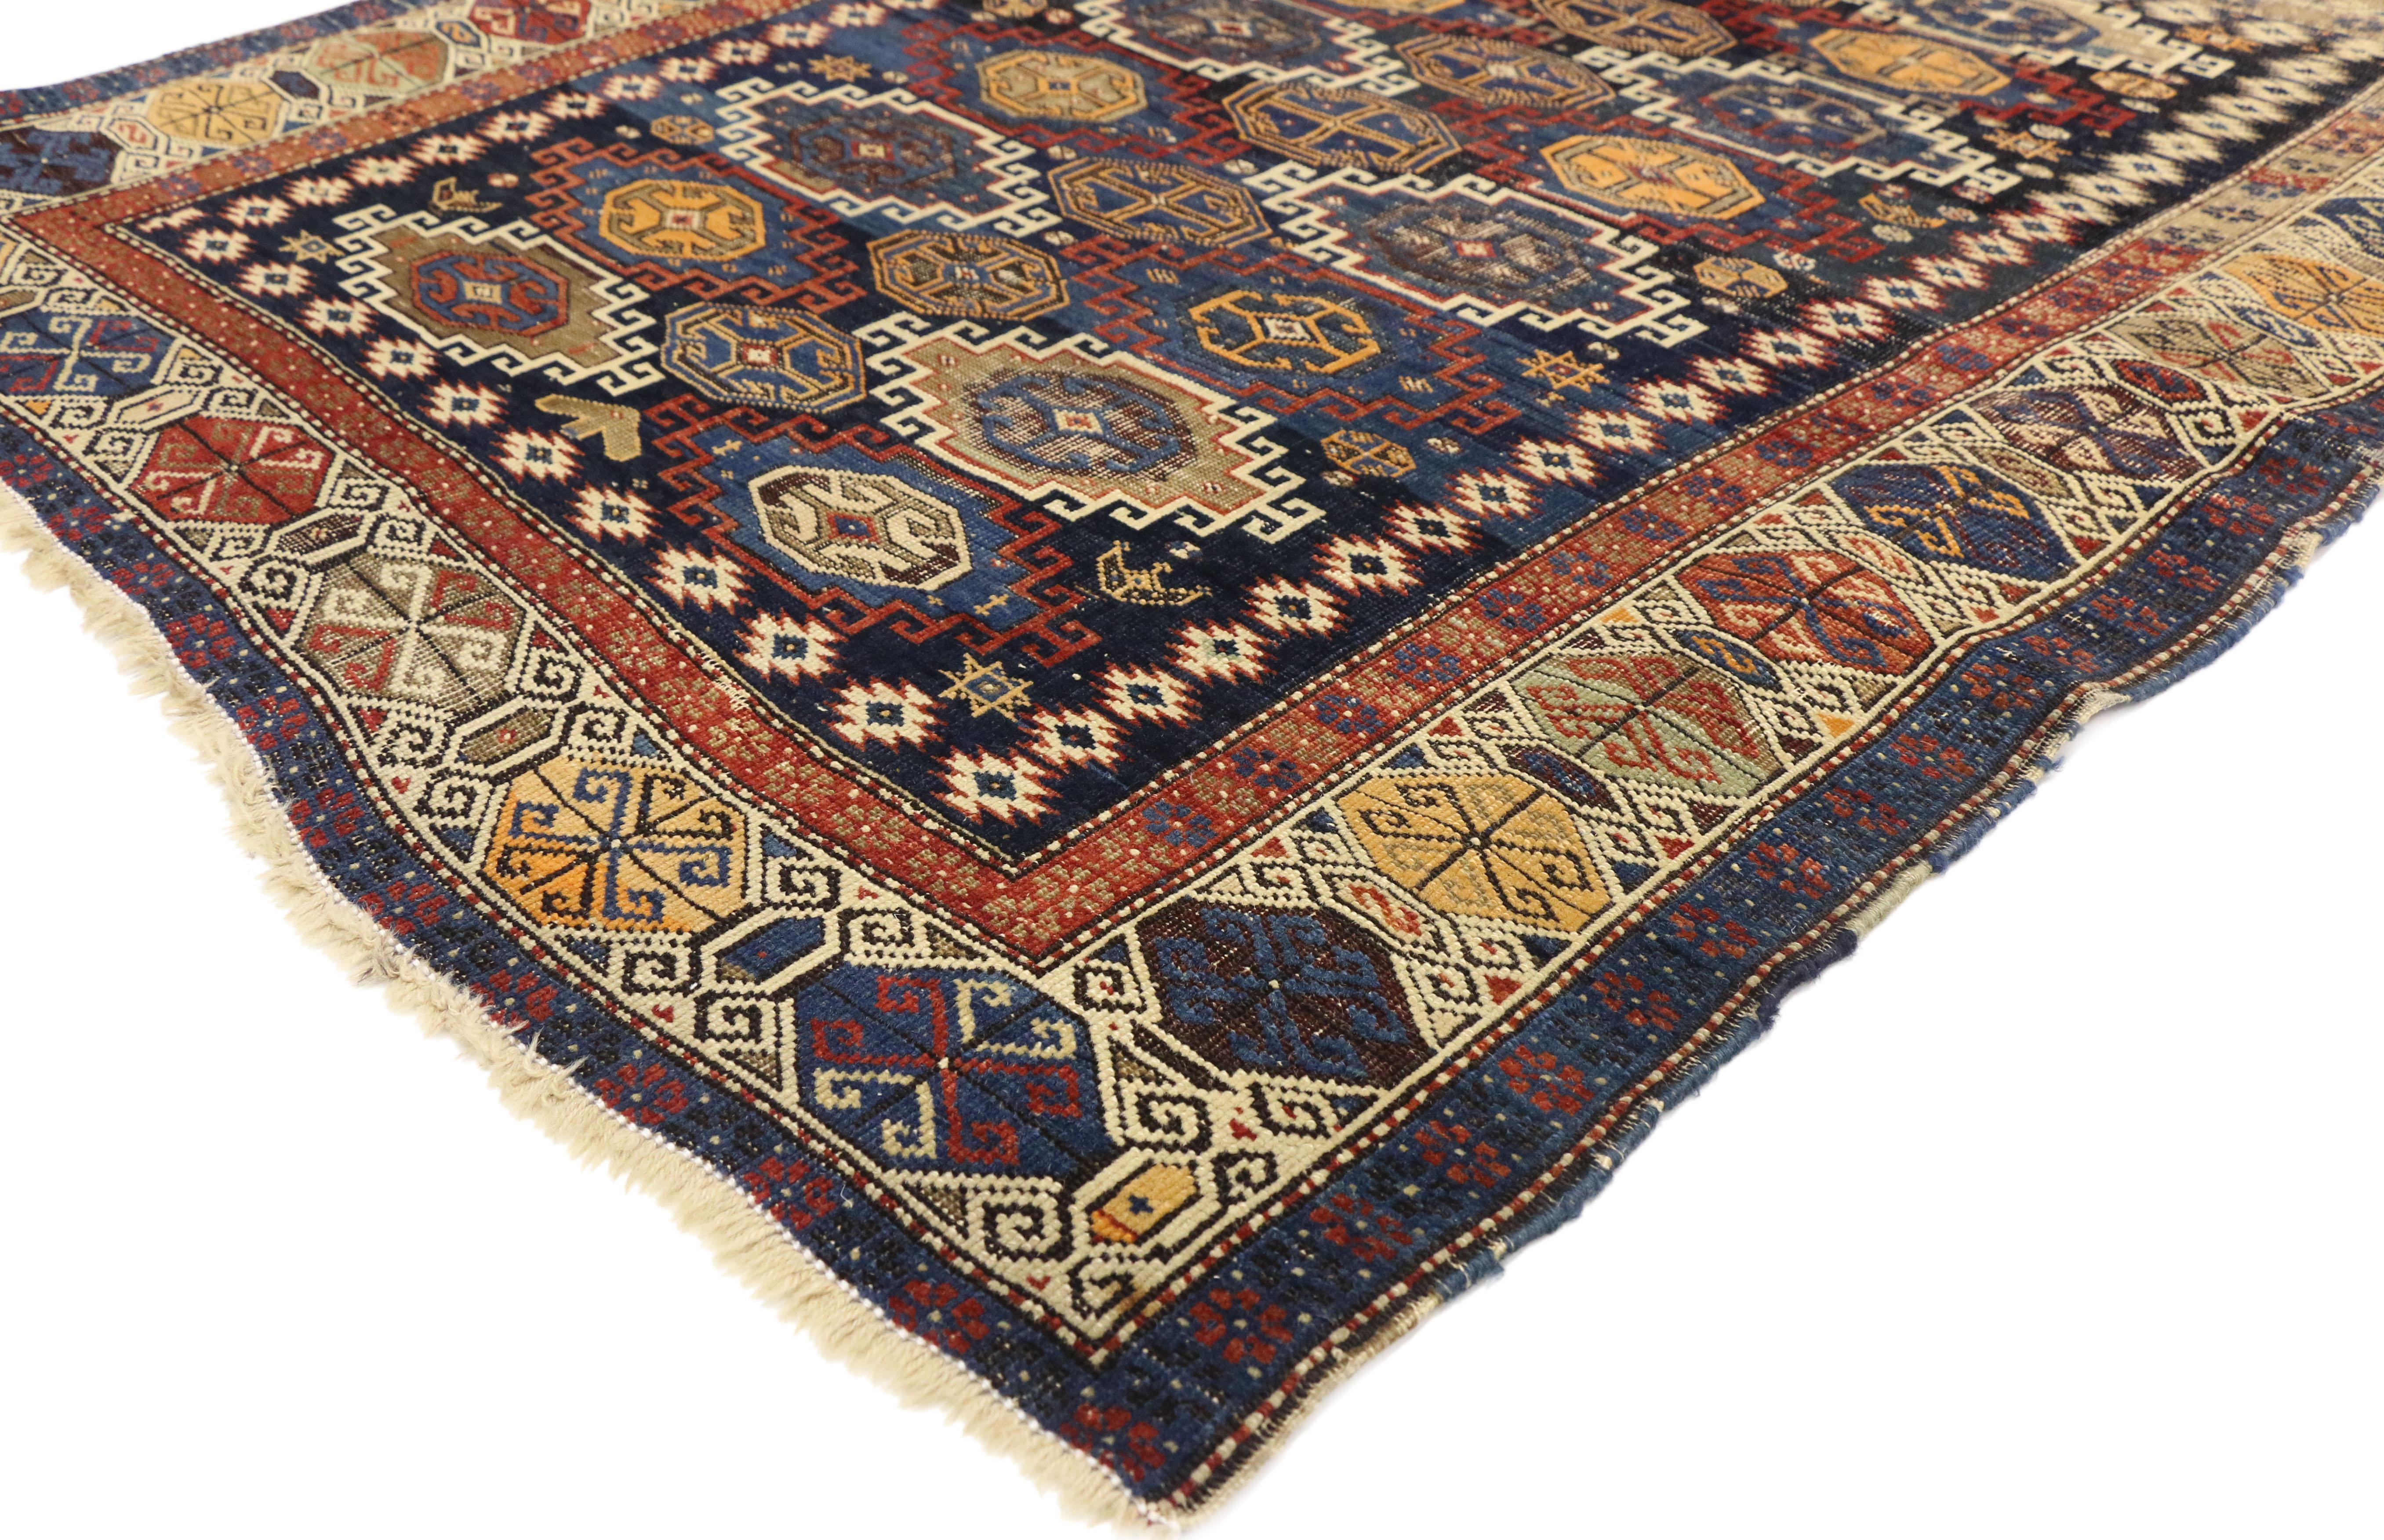 72884, antique Caucasian Kazak rug with rustic tribal style, square rug. This hand knotted wool antique Caucasian Kazak rug with rustic tribal style features multi-color stepped and hooked medallions in an all-over pattern set with octagons and